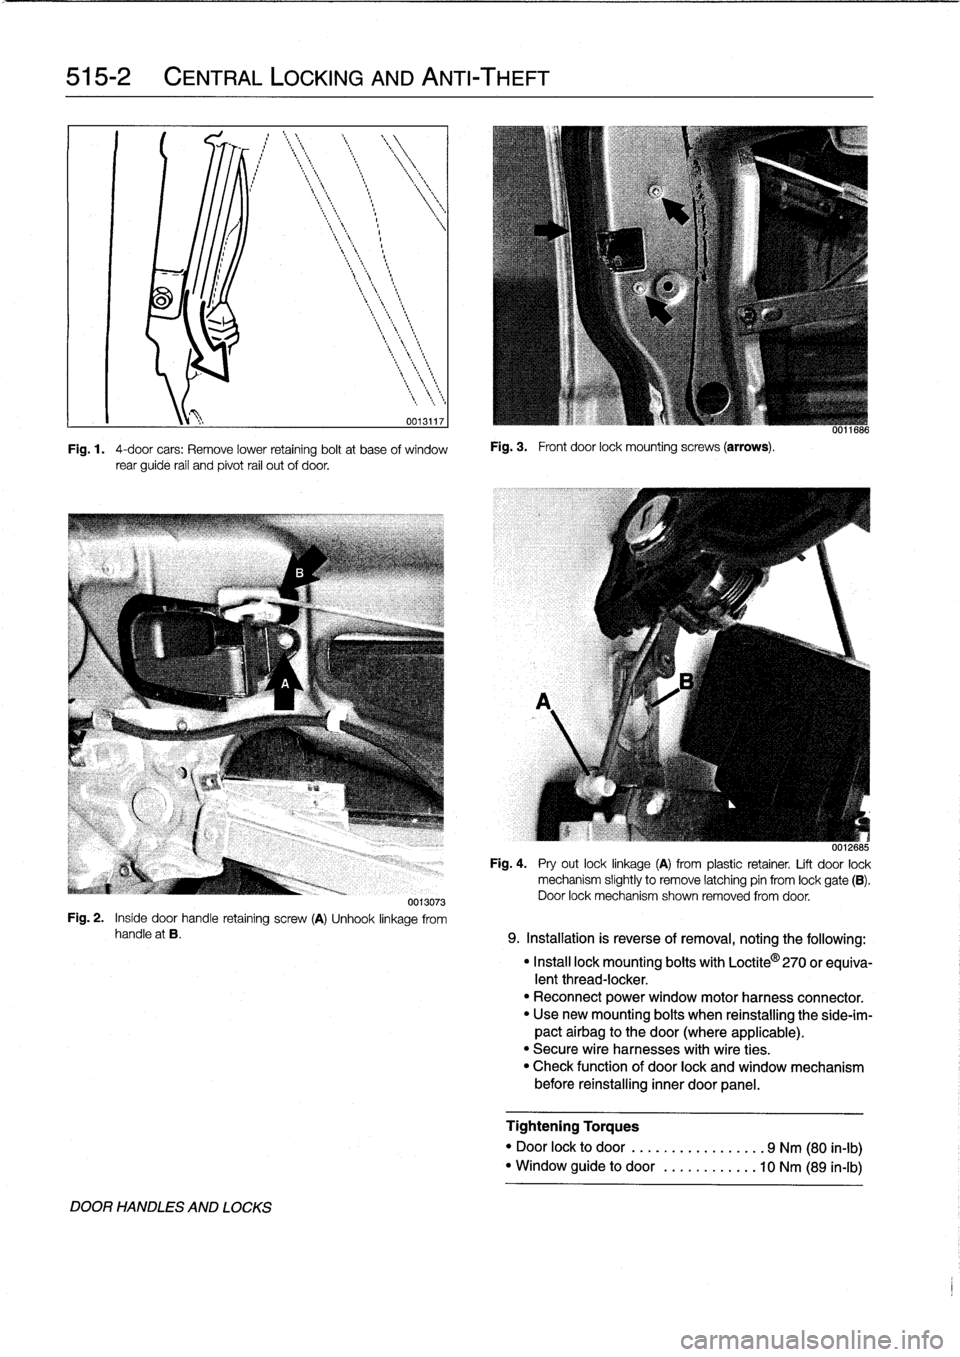 BMW 323i 1995 E36 Service Manual 
515-2

	

CENTRAL
LOCKING
AND
ANTI-THEFT

0013117

Fig
.
1
.

	

4-door
cars
:
Remove
lower
retaining
boltat
base
of
window
rear
guide
rail
and
pivot
rail
out
of
door
.

Fig
.
3
.

	

Front
door
lock